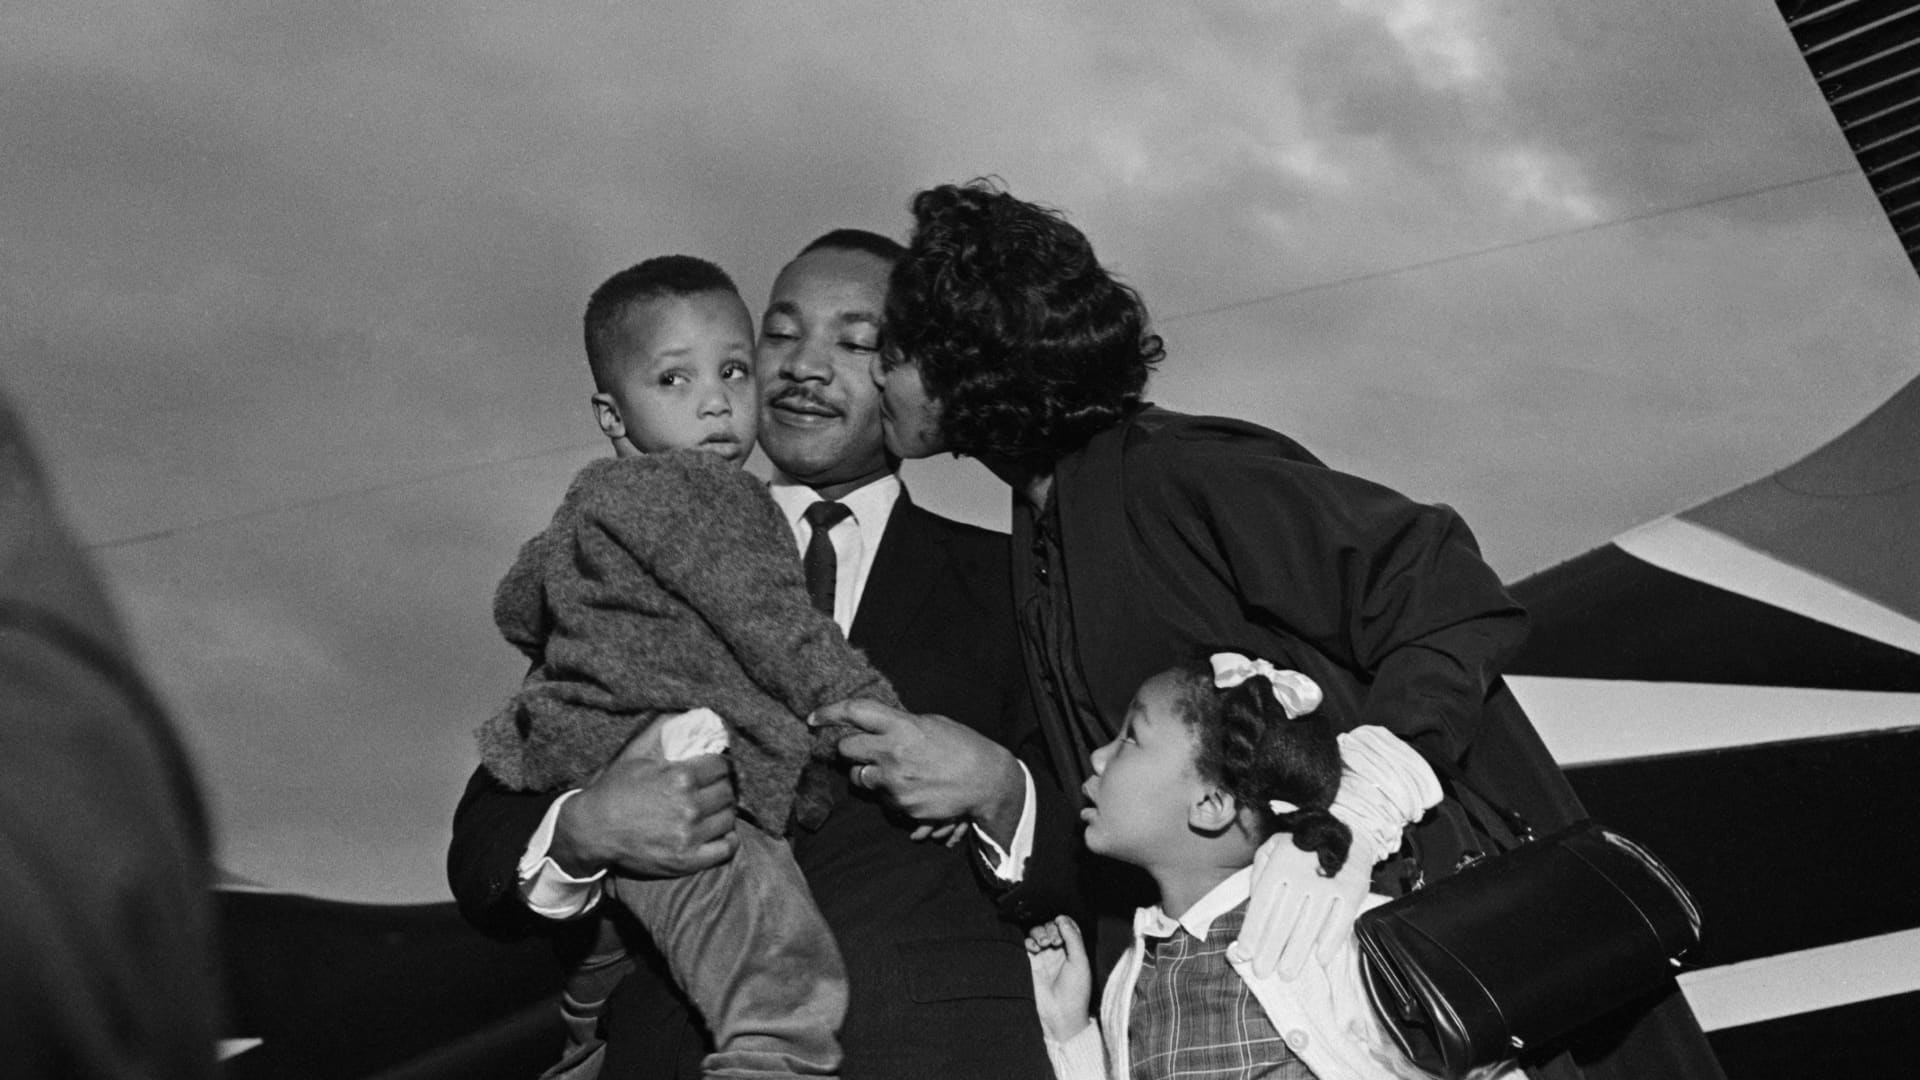 After Dr. Martin Luther King, Jr. is freed from jail under a $2000 appeal bond, he is greeted by his wife Coretta and children, Marty and Yoki, at the airport in Chamblee, Georgia.